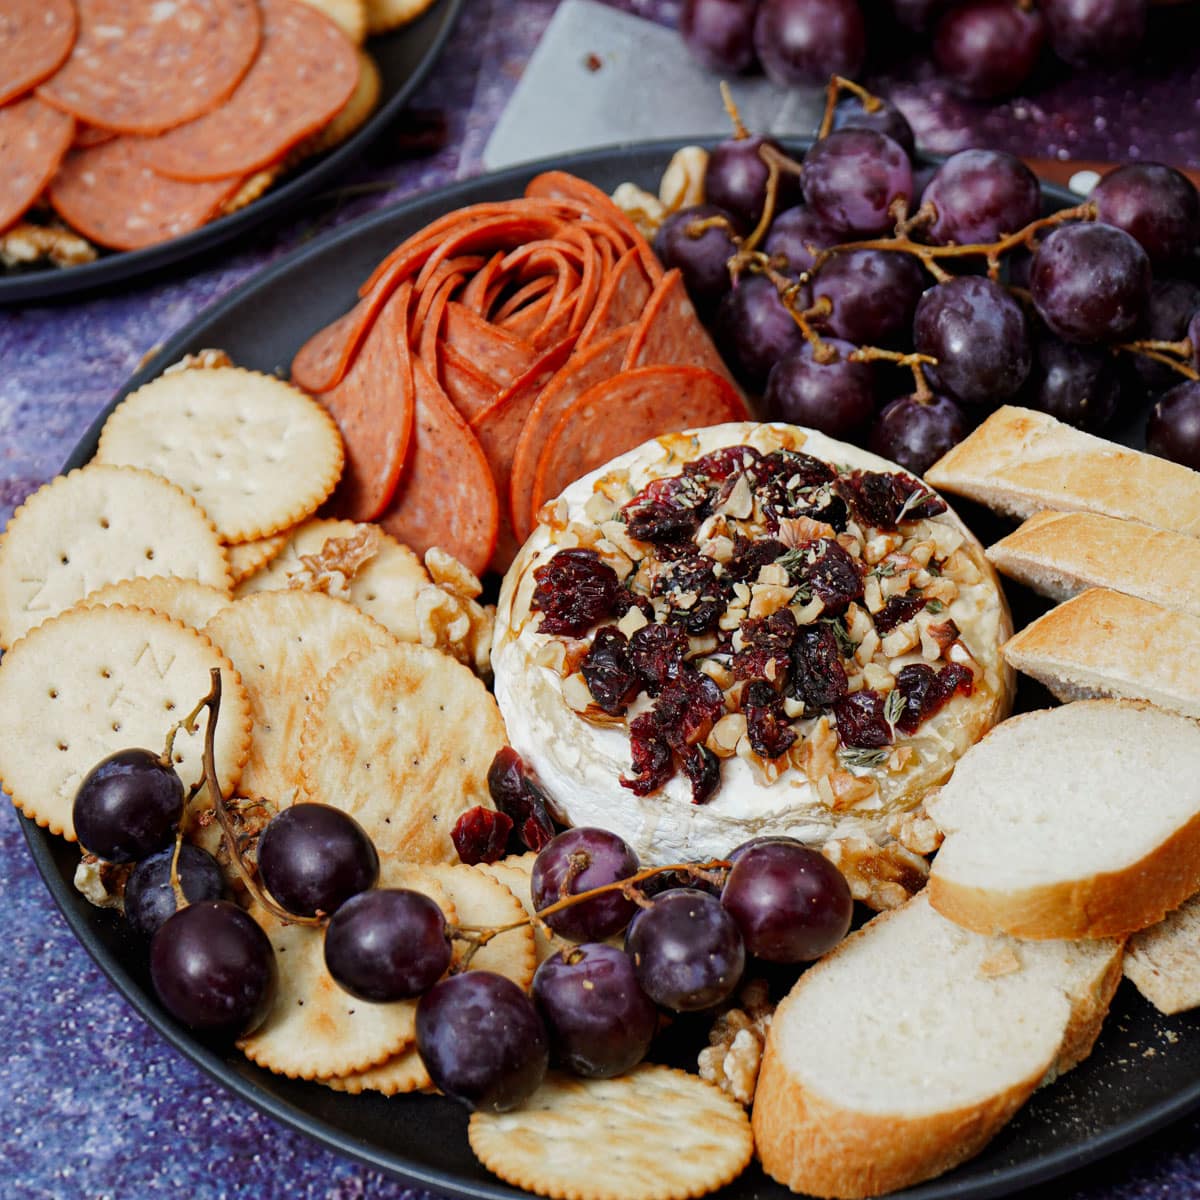 Air fried Brie cheese with baguette slices, grapes, crackers, and pepperoni.